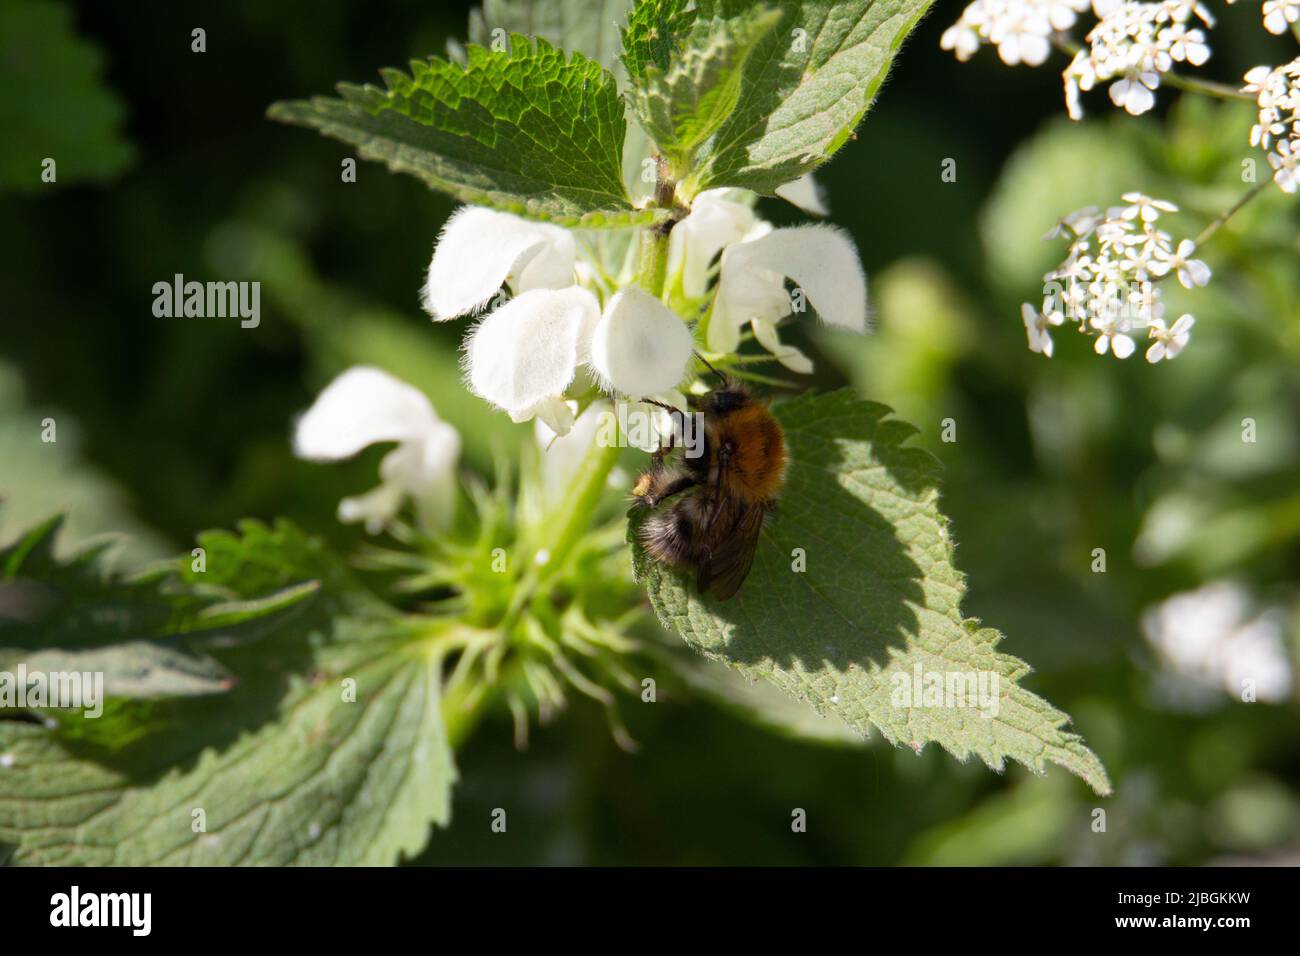 close up of a single solitary bee feeding on a white wild flower with other wild flowers in the background Stock Photo